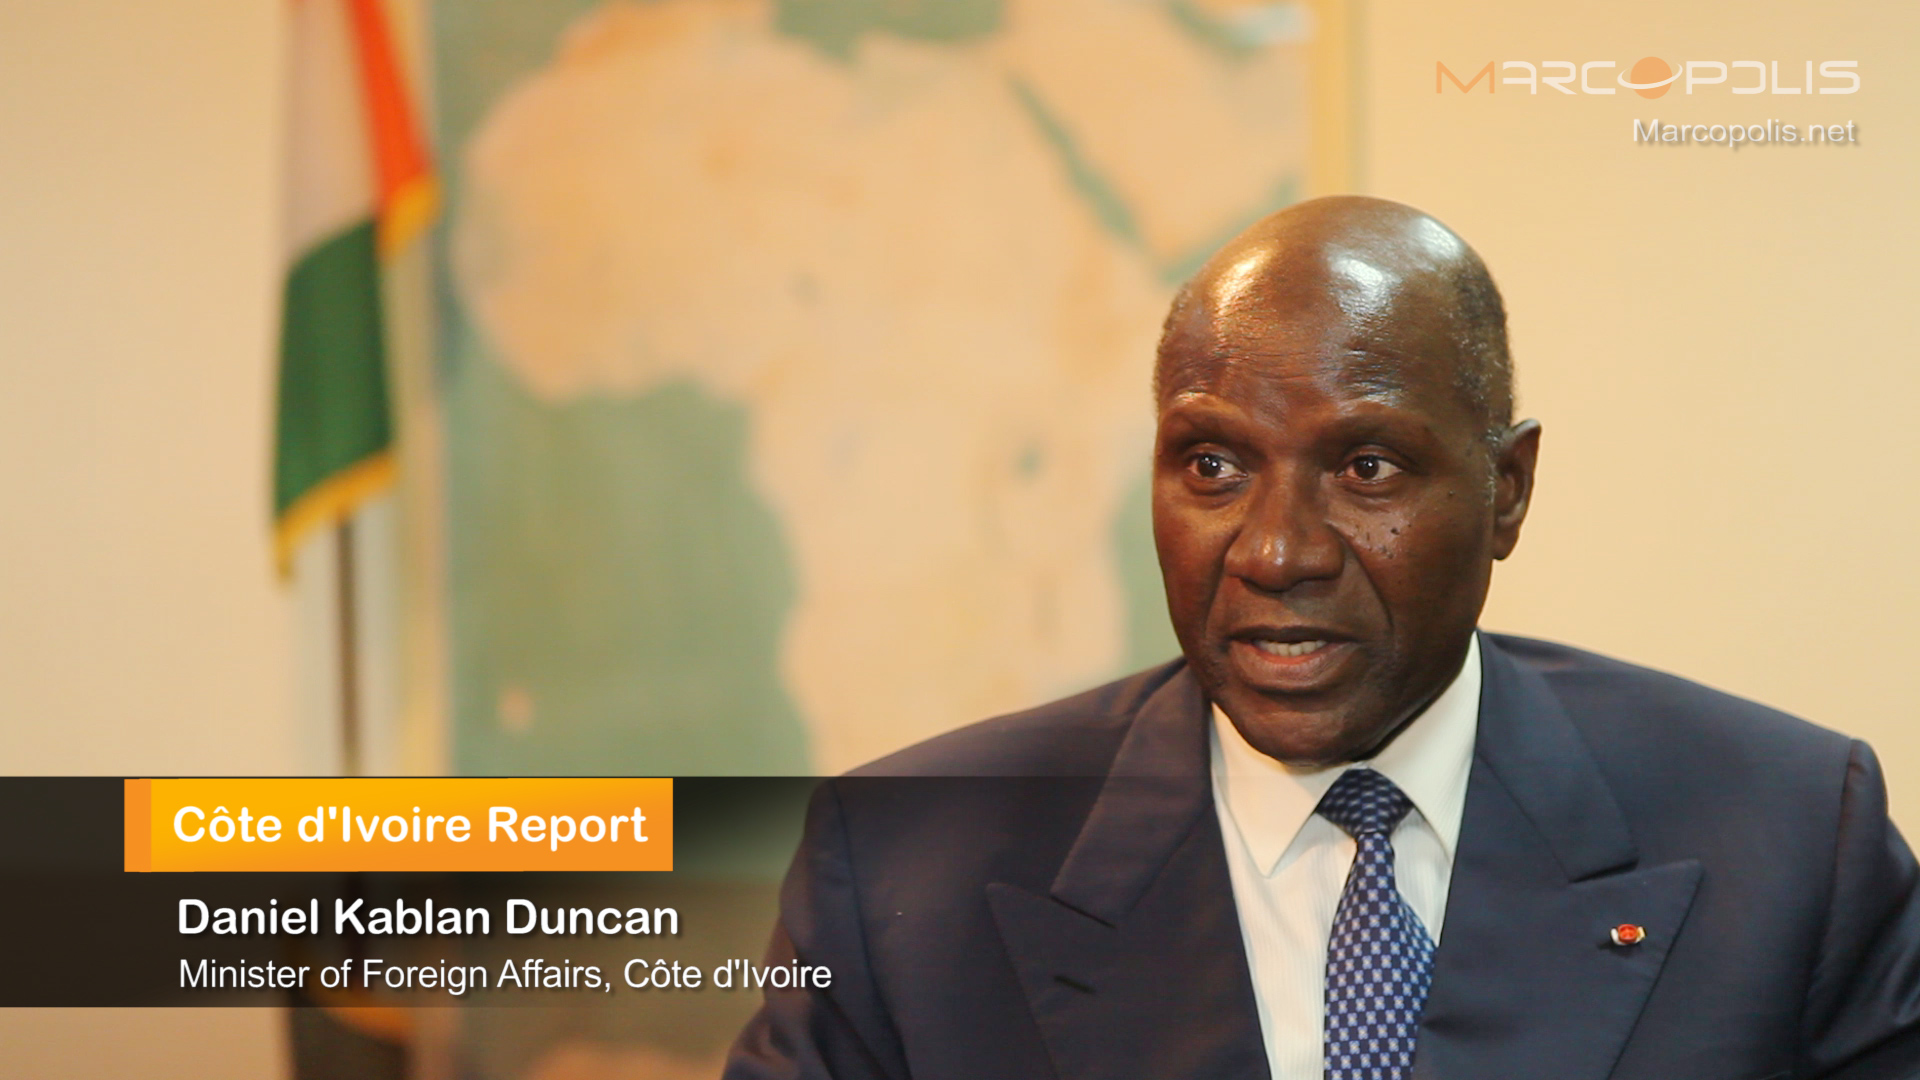 Côte d'Ivoire Foreign Policy: Emerging Country by 2020 and Double Digit Growth 